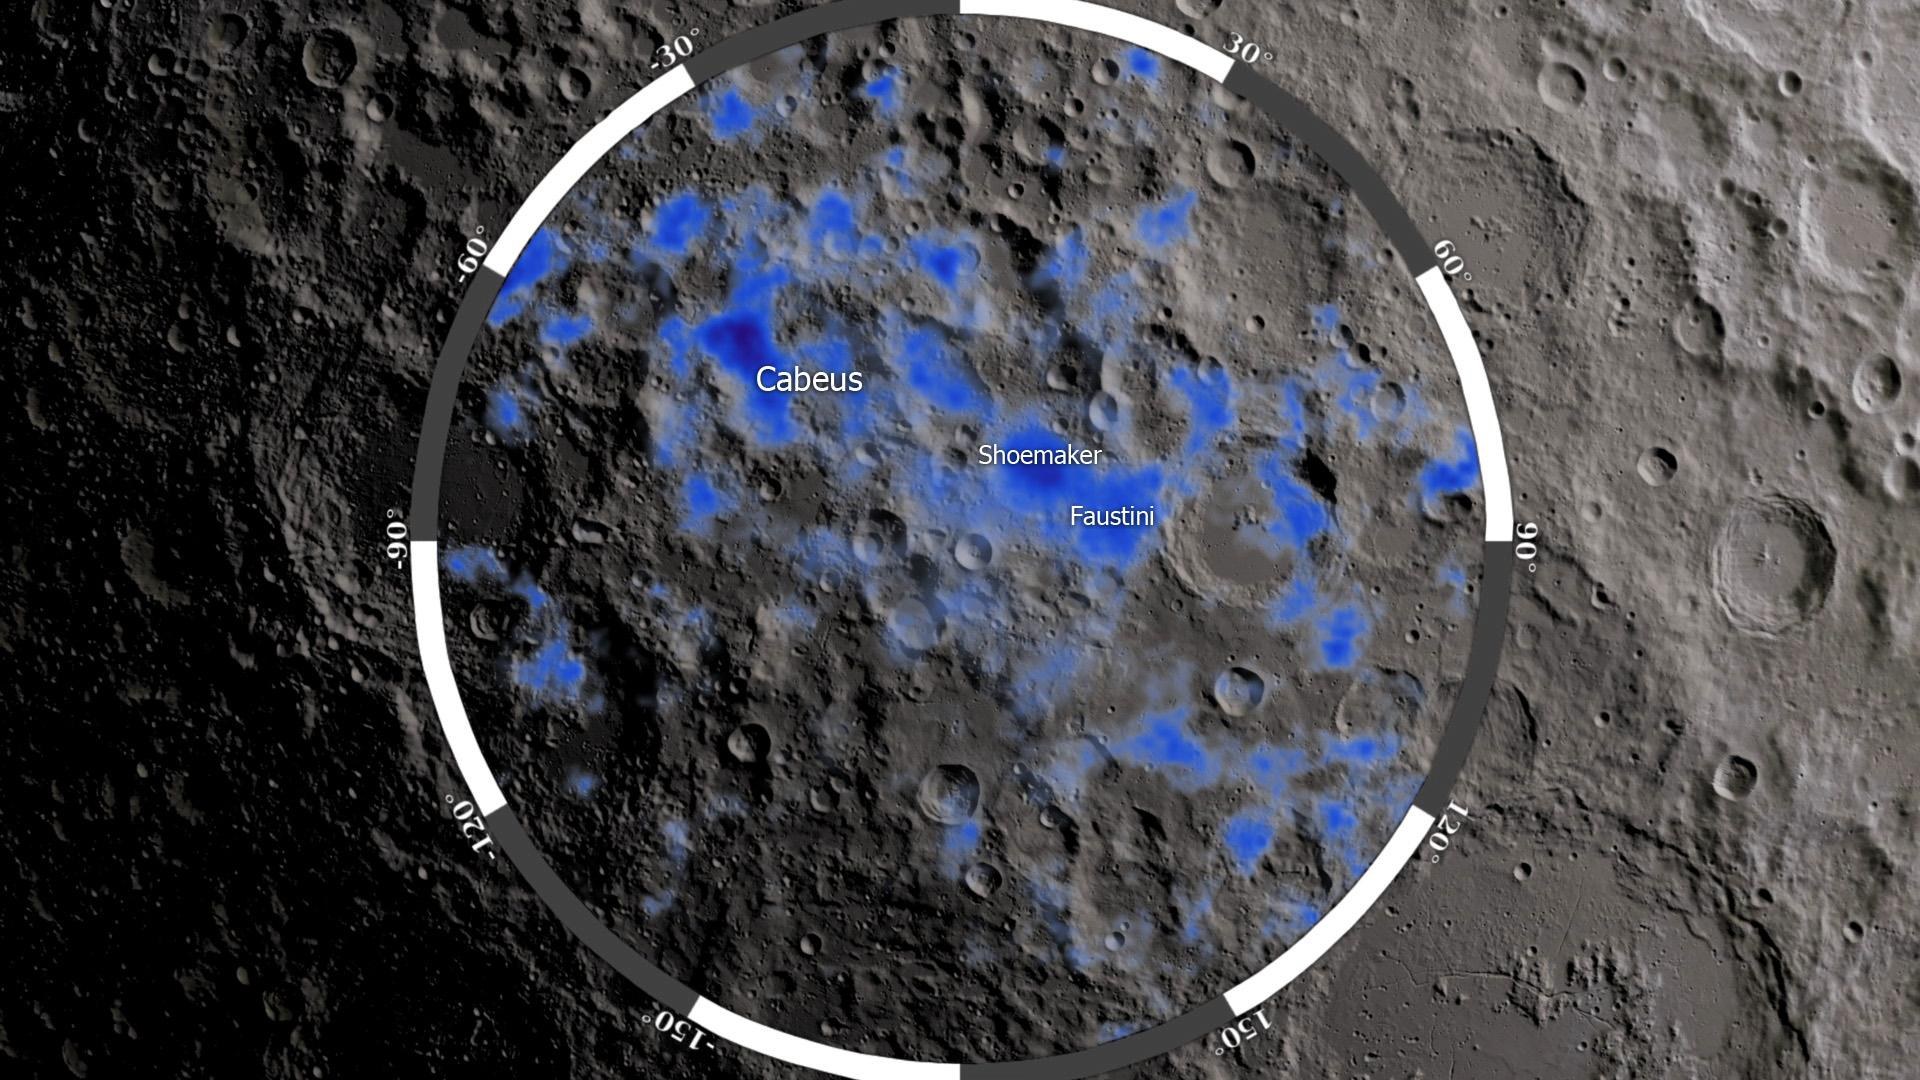 Underground 'ice reservoirs' in the Cabeus, Shoemaker and Faustini craters at the Moon’s south pole